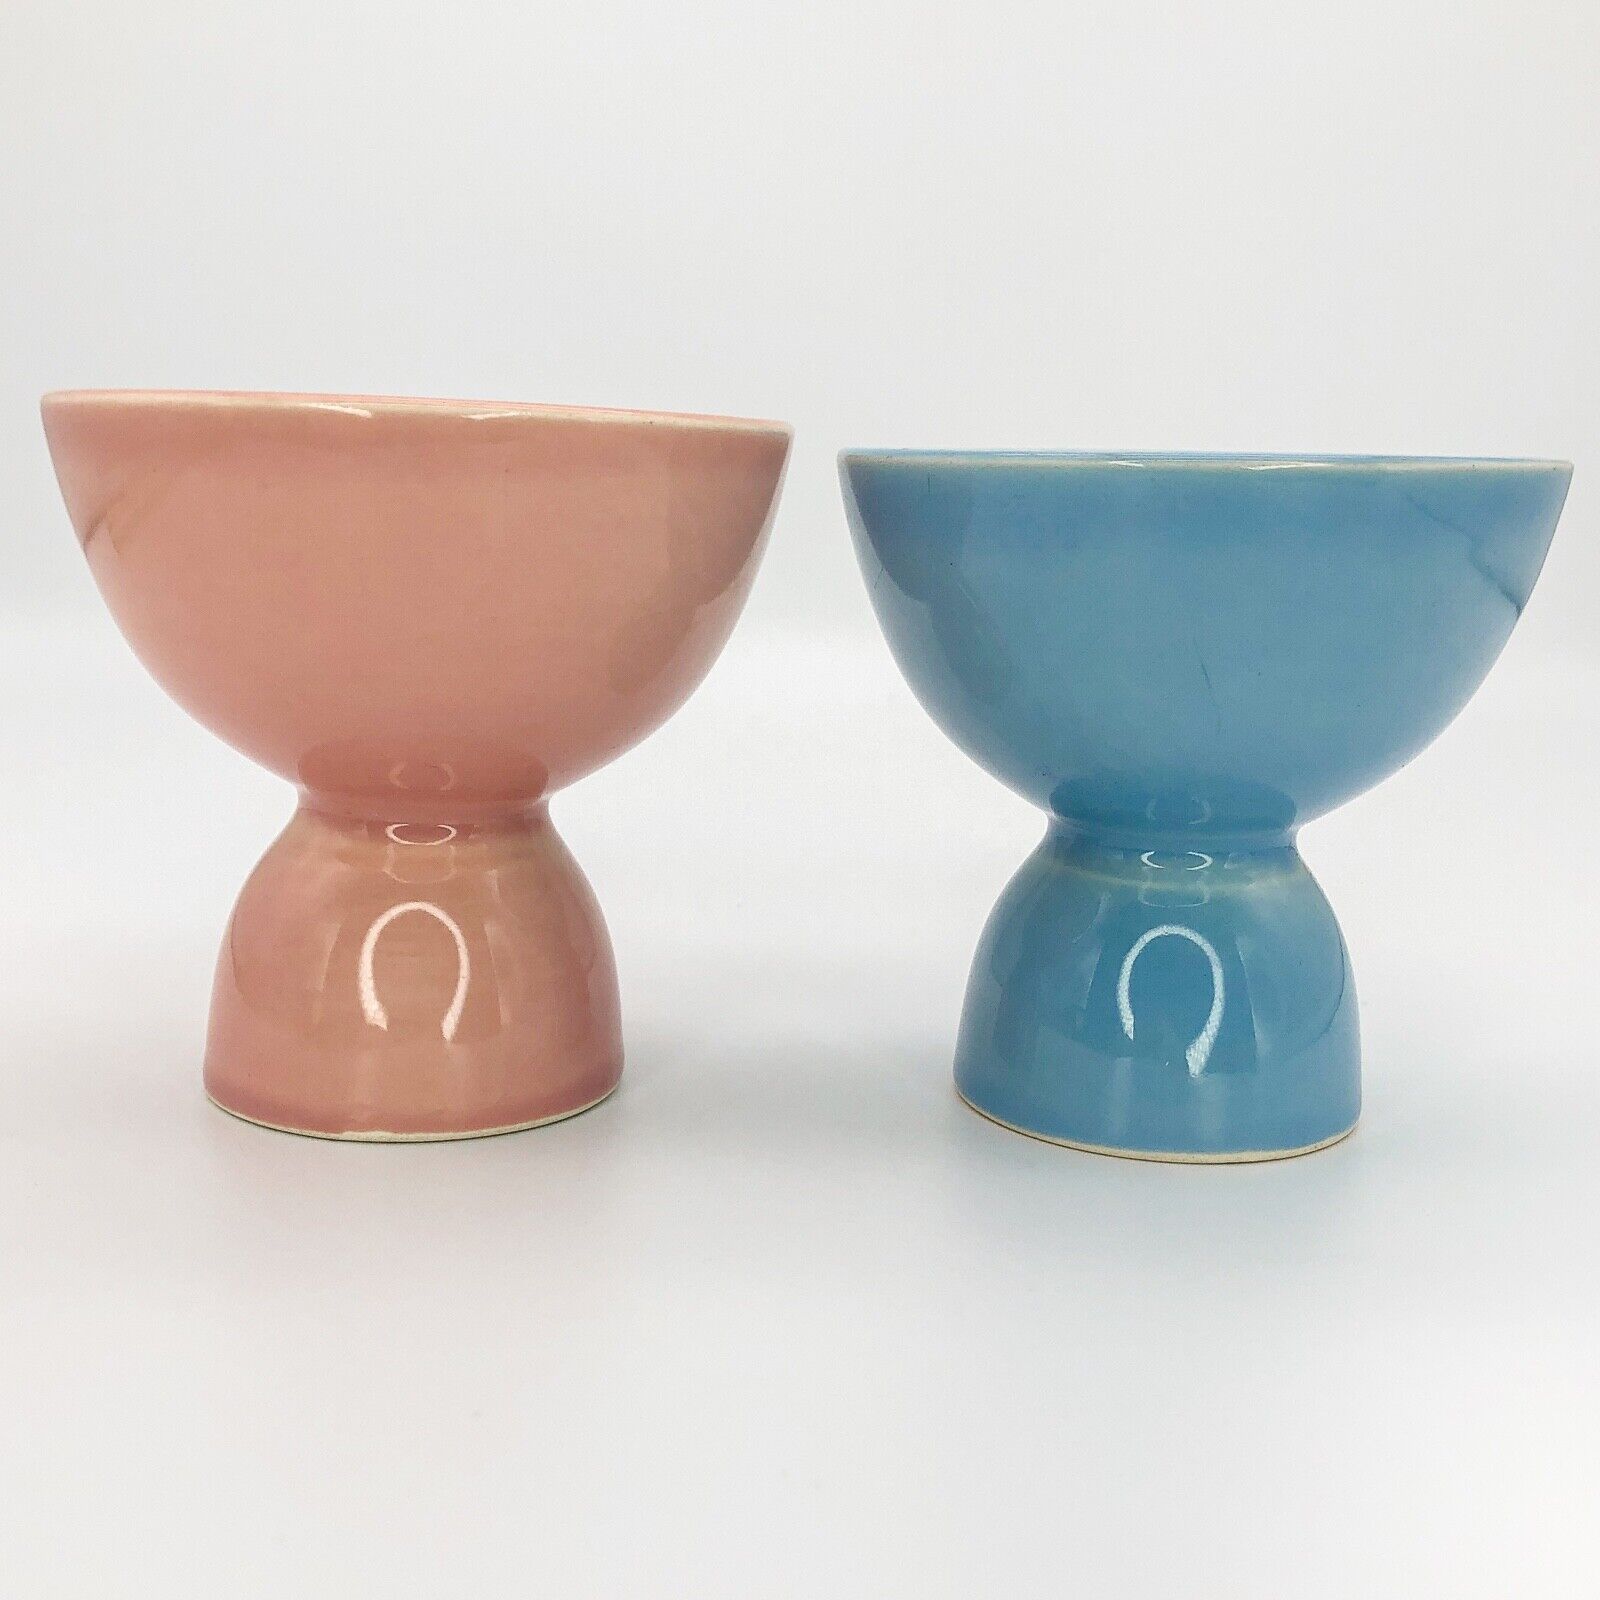 Vintage LuRay Eggcup Dish Double Sided Blue Pink Pastel Ceramic Kitchen Pottery